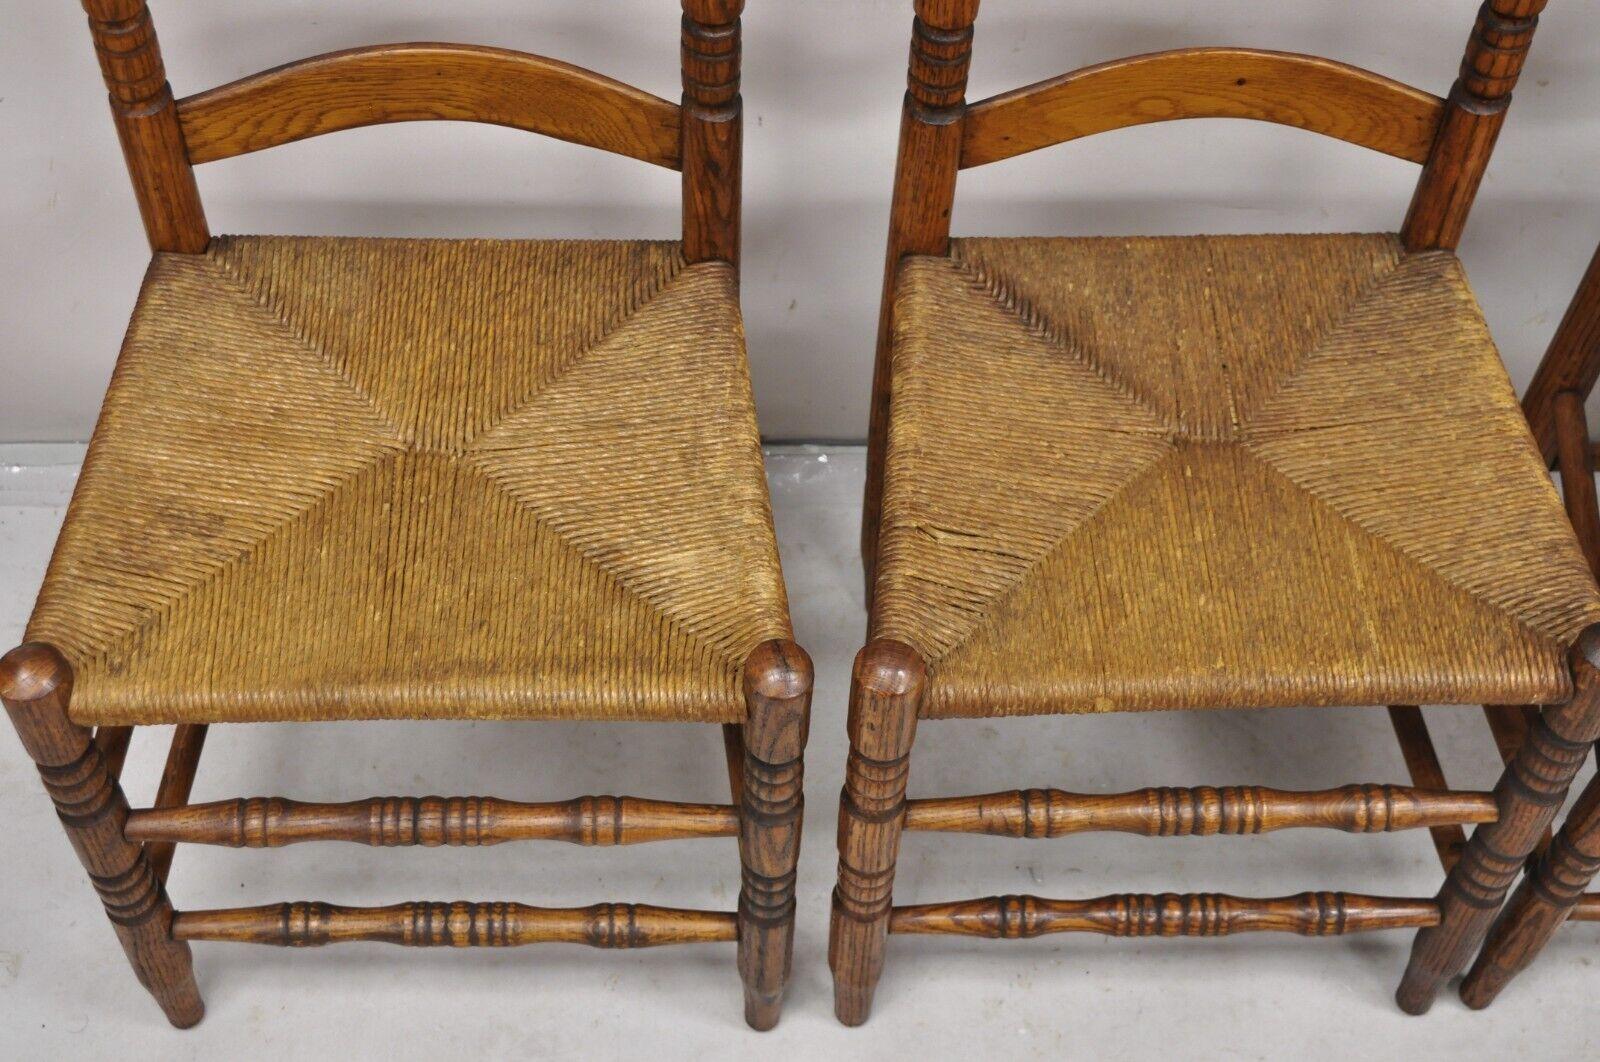 Antique Ladderback Primitive Rustic Oak Wood Rush Seat Dining Chairs - Set of 4 In Good Condition For Sale In Philadelphia, PA